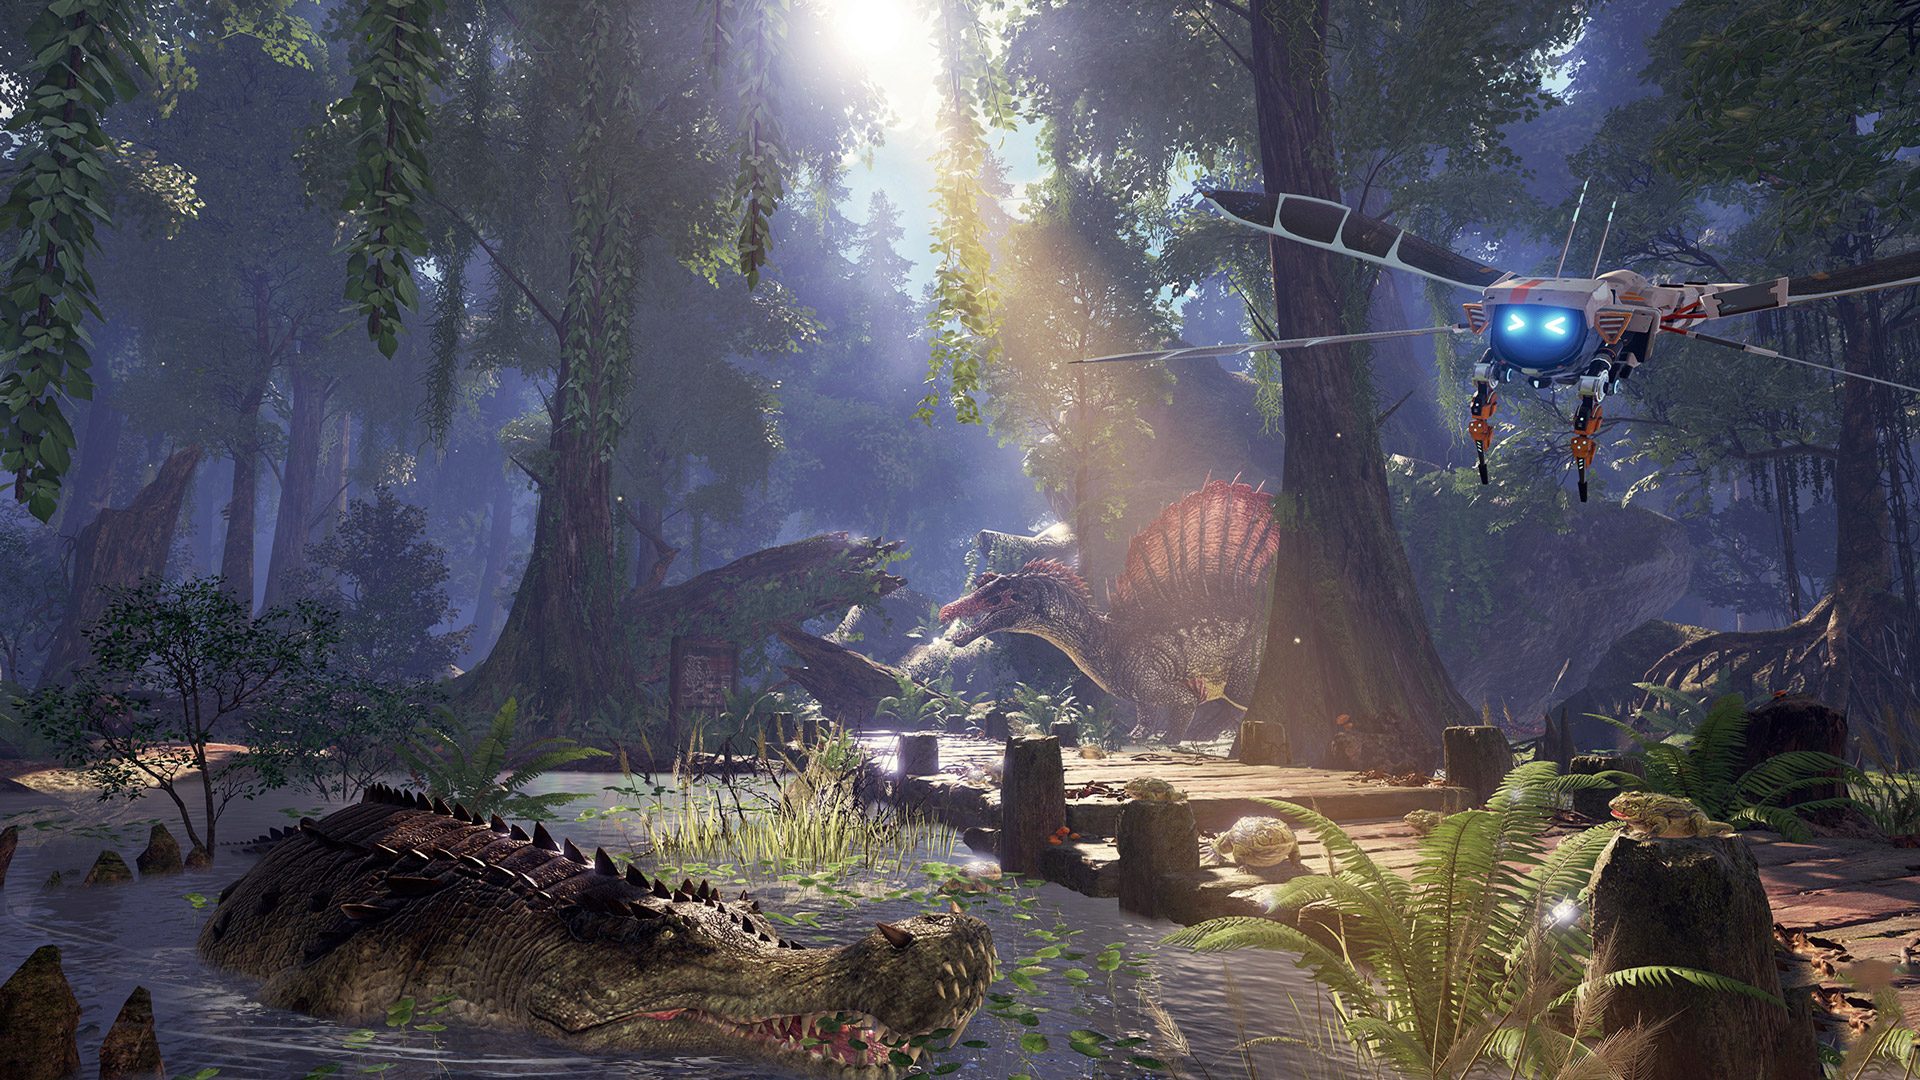 Ark Survival Evolved Vr Spinoff Ark Park Aims For Educational Dino Experience Road To Vr